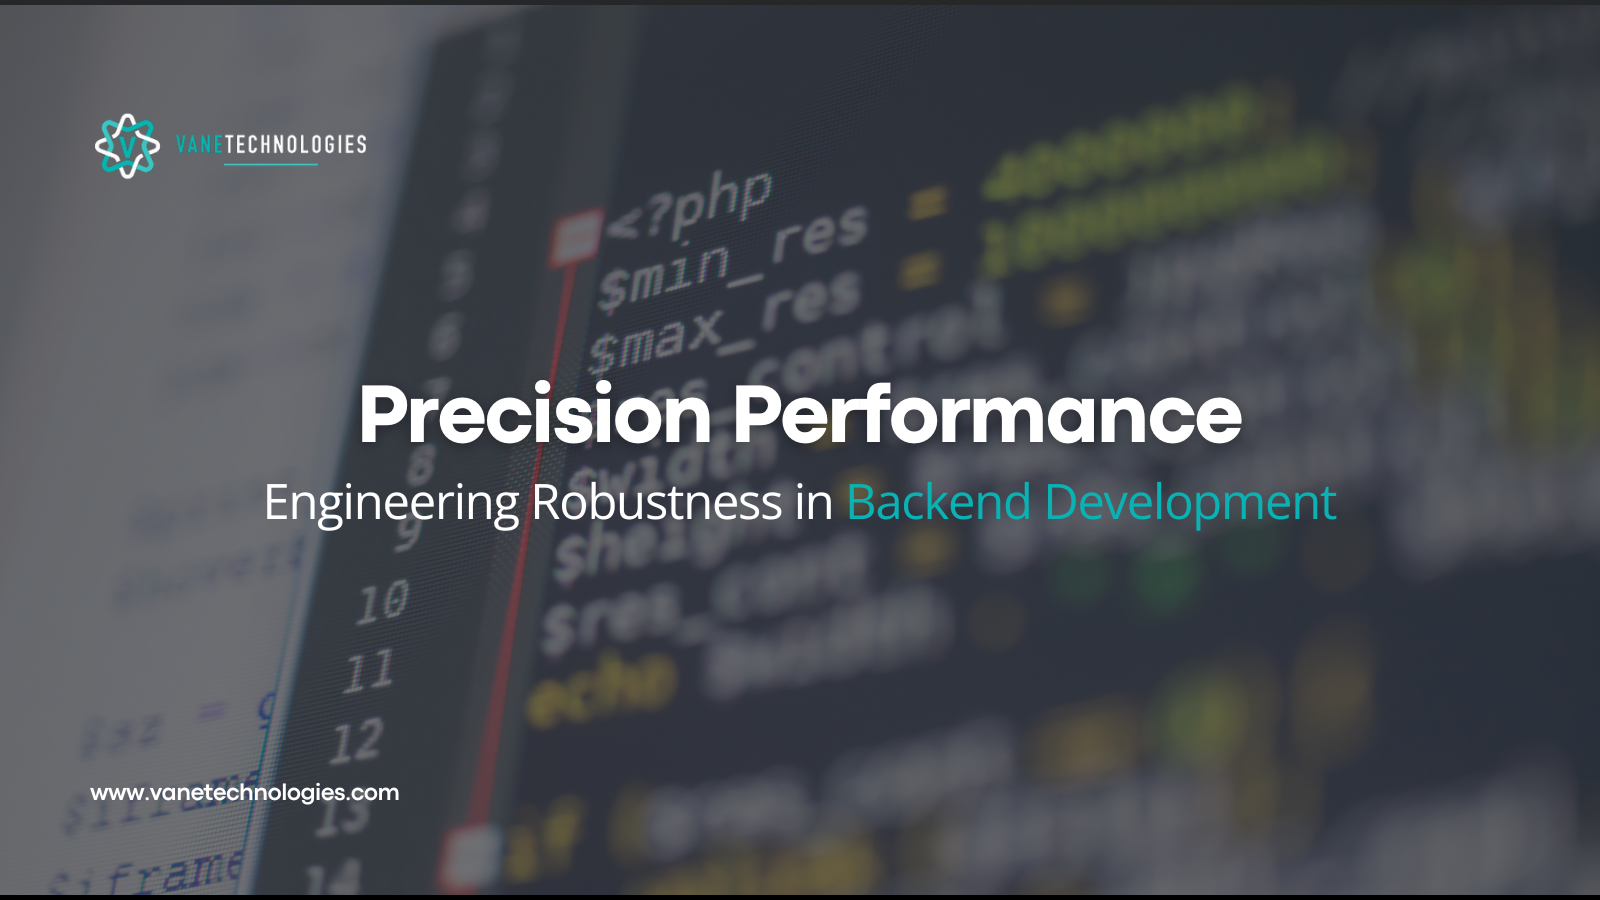 Precision Performance: Engineering Robustness in Backend Development